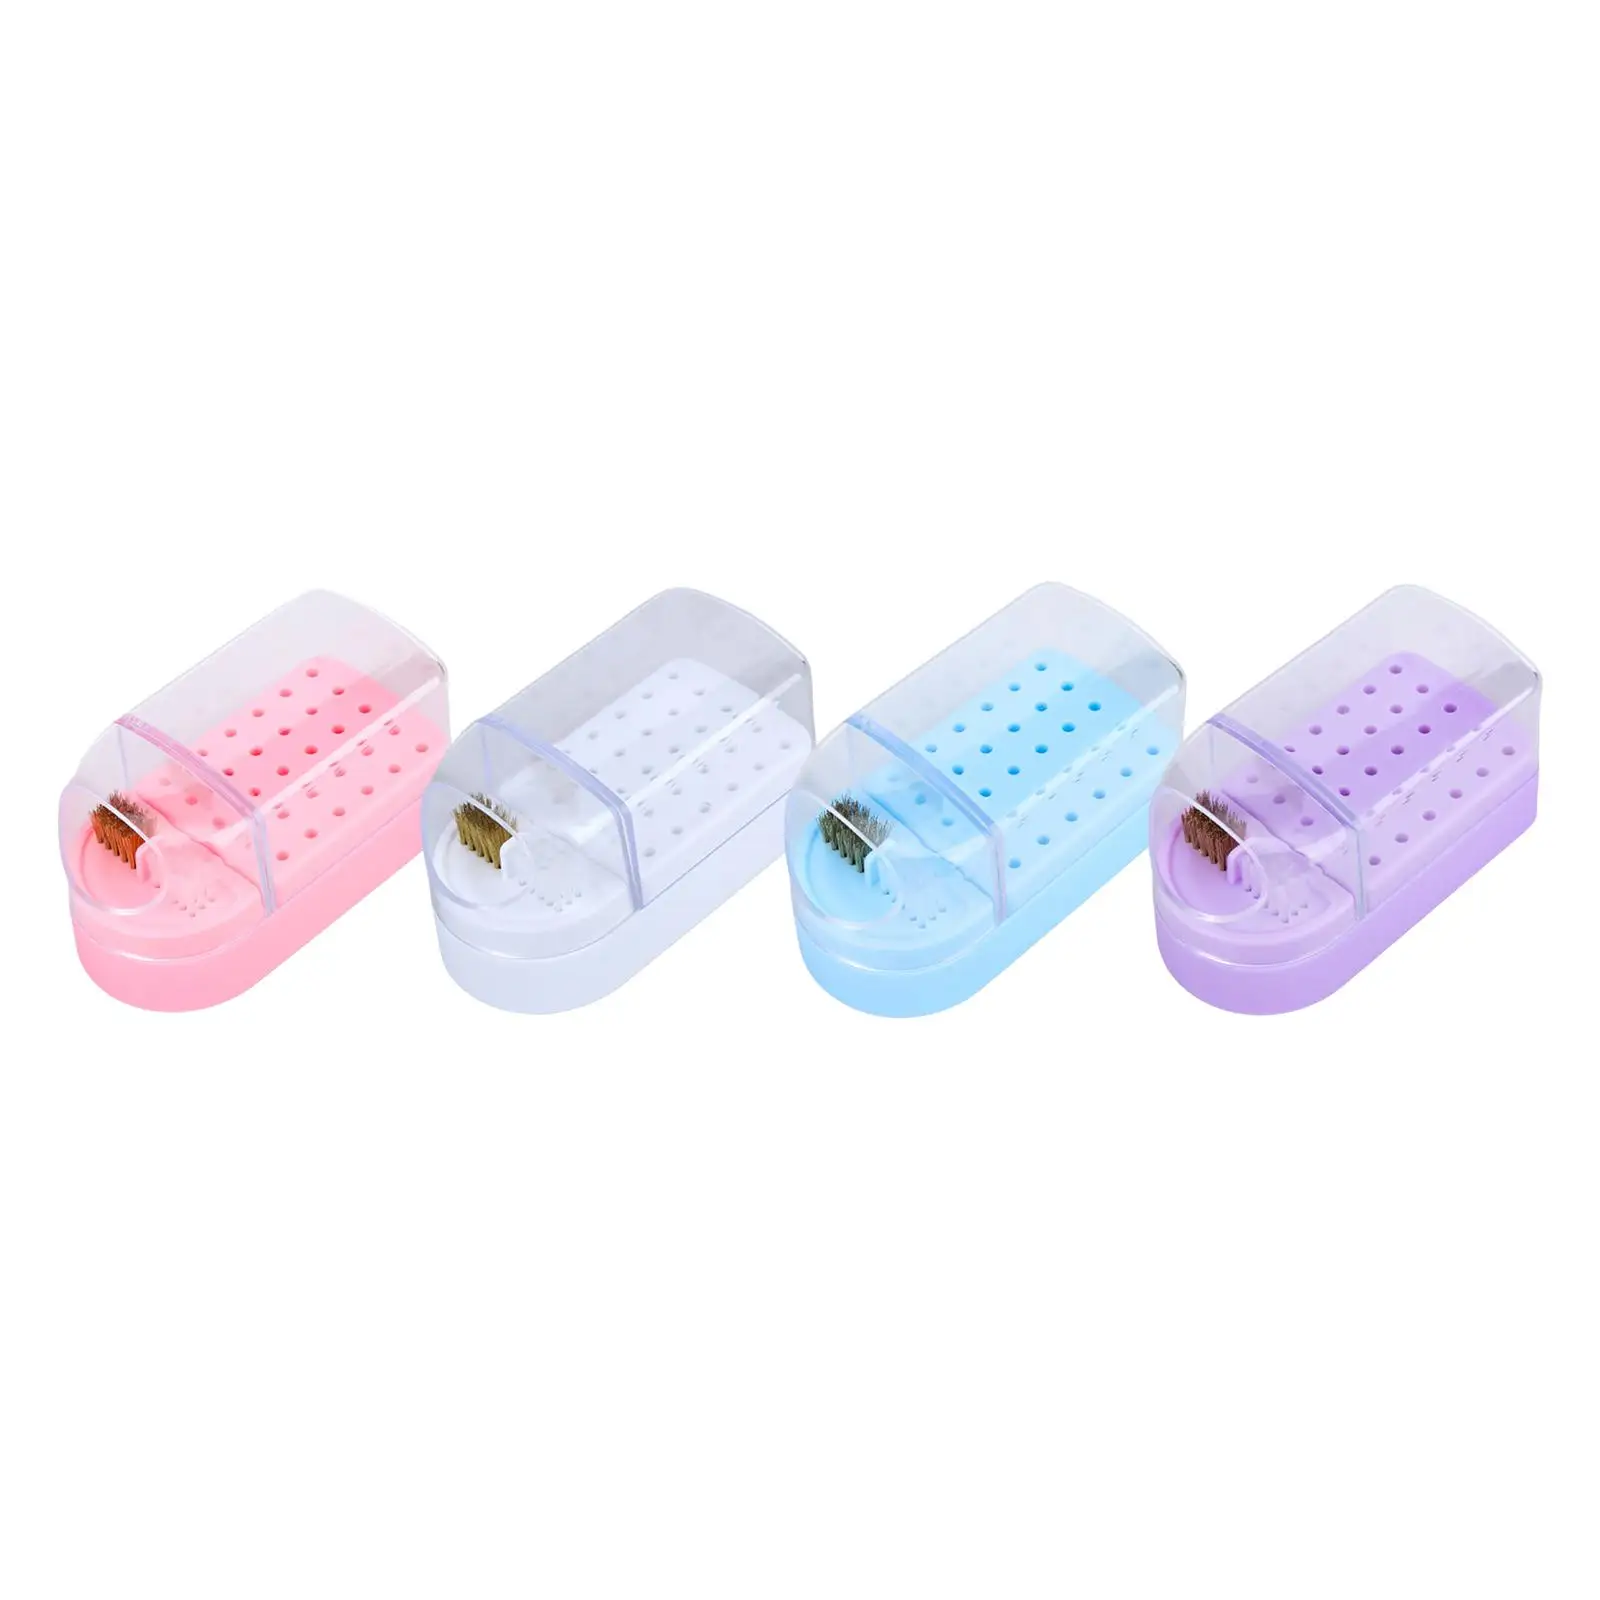 Nail Drill Bit Holder Lightweight Professional 30 Holes Dustproof Portable Storage Container Manicure Tools Drill Bit Stand